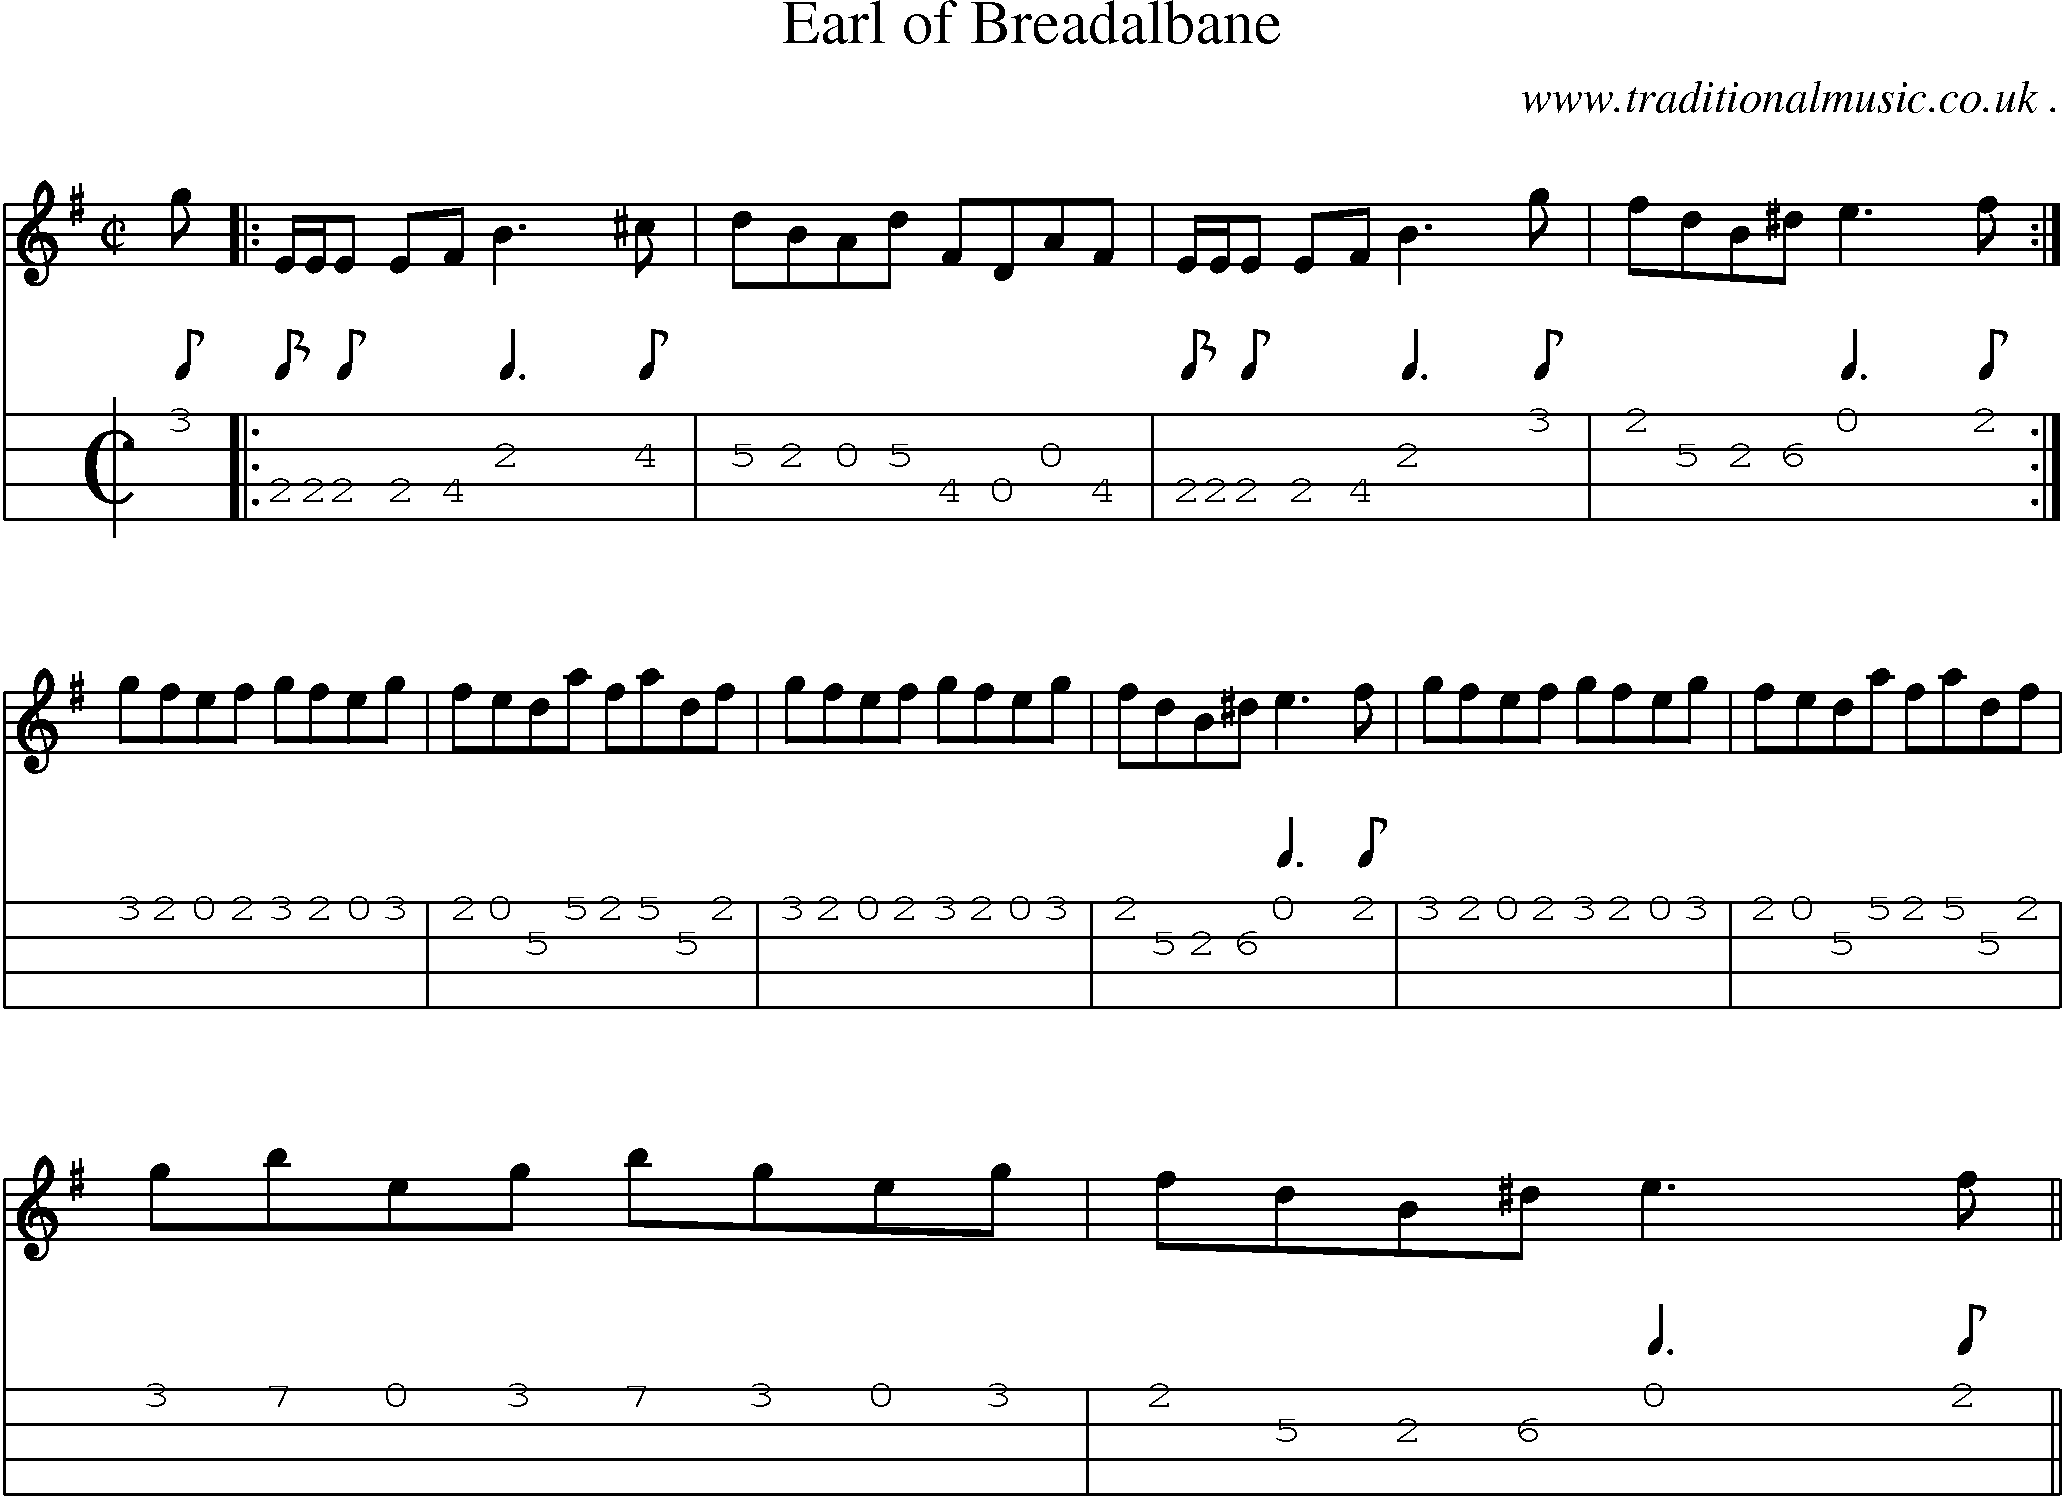 Sheet-music  score, Chords and Mandolin Tabs for Earl Of Breadalbane